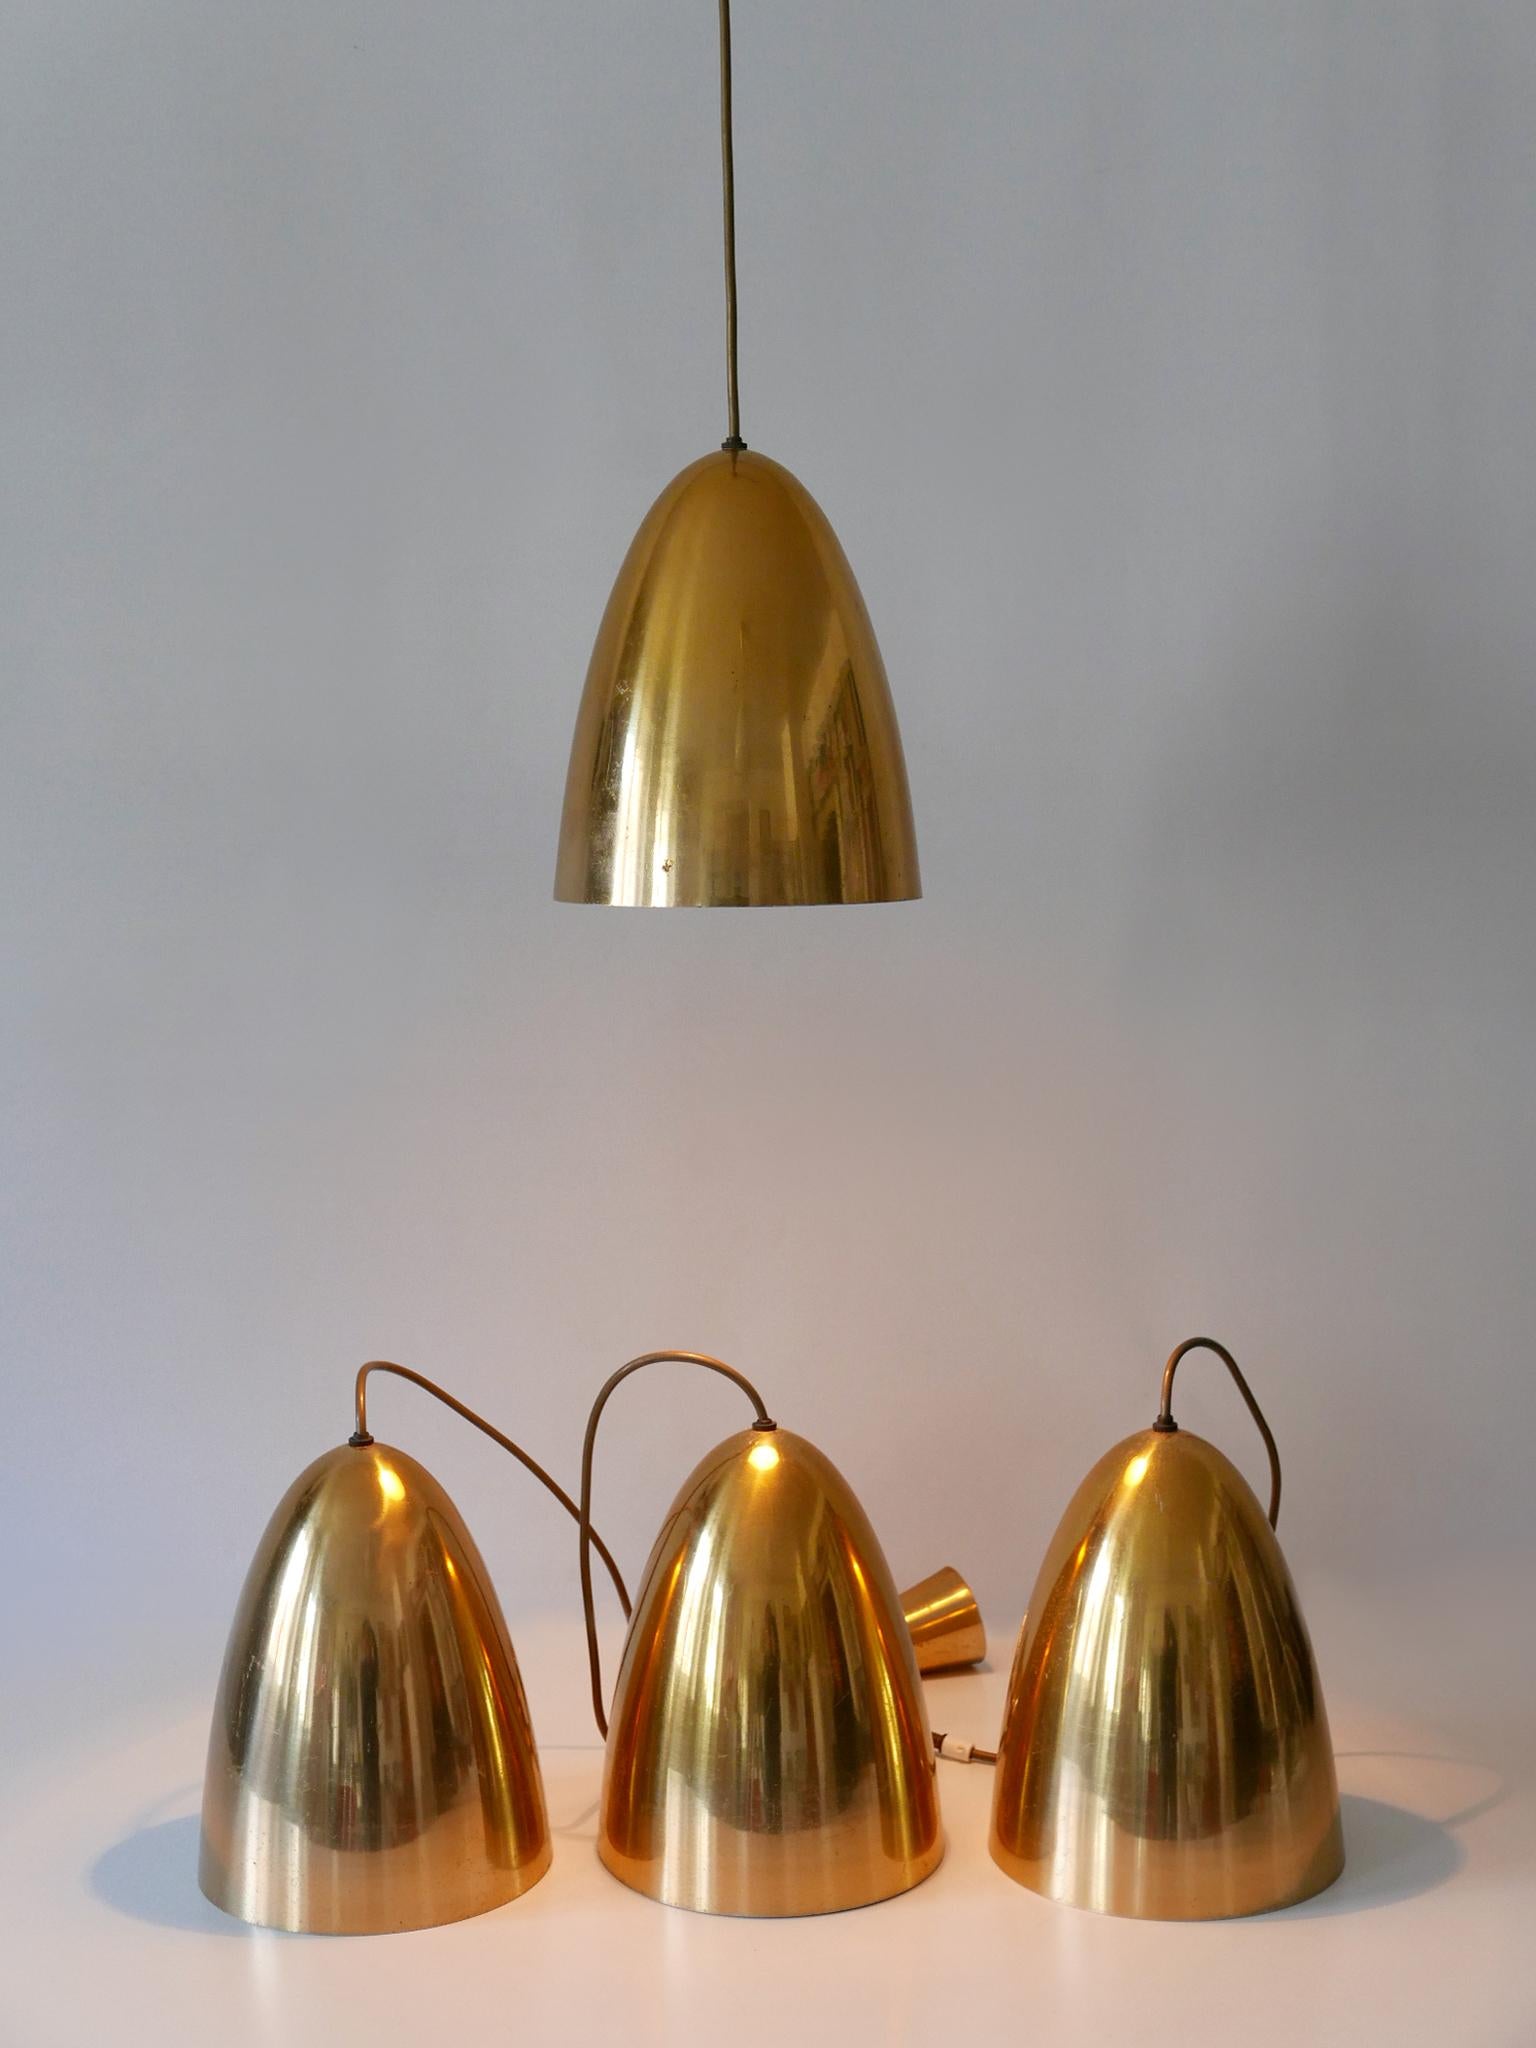 1 of 4 Elegant Mid Century Modern Pendant Lamps or Hanging Lights Germany 1950s For Sale 3